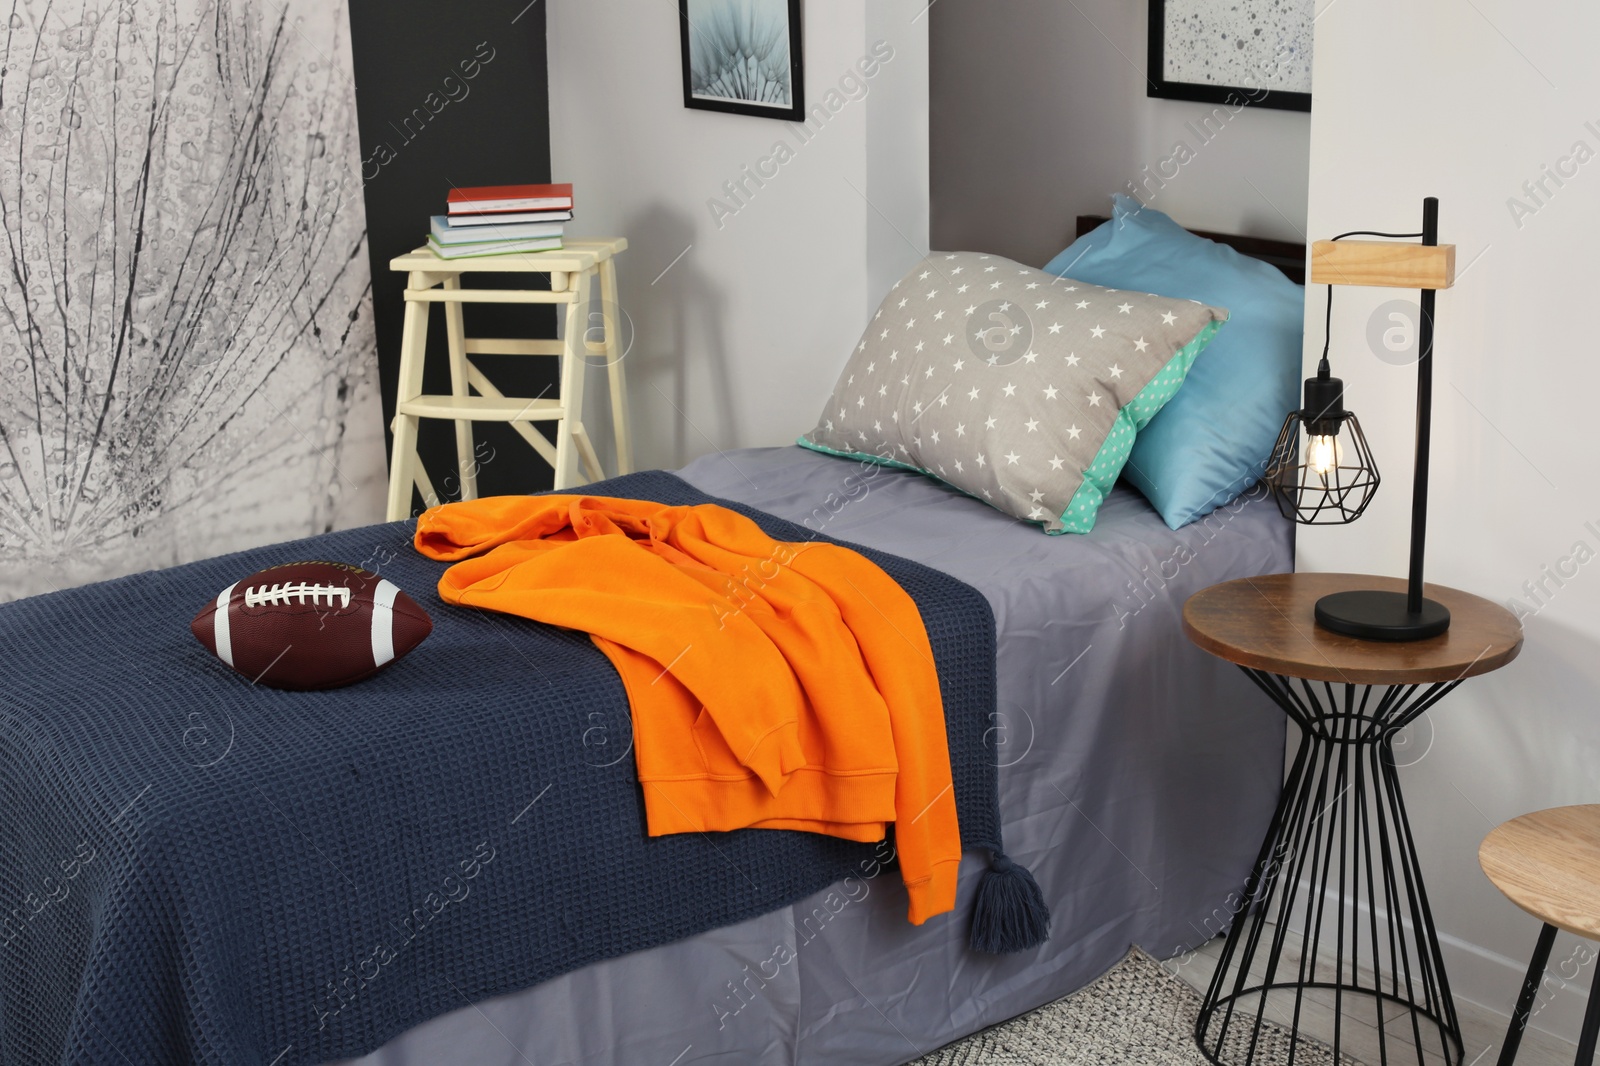 Photo of Stylish teenager's room interior with comfortable bed, lamp and football ball